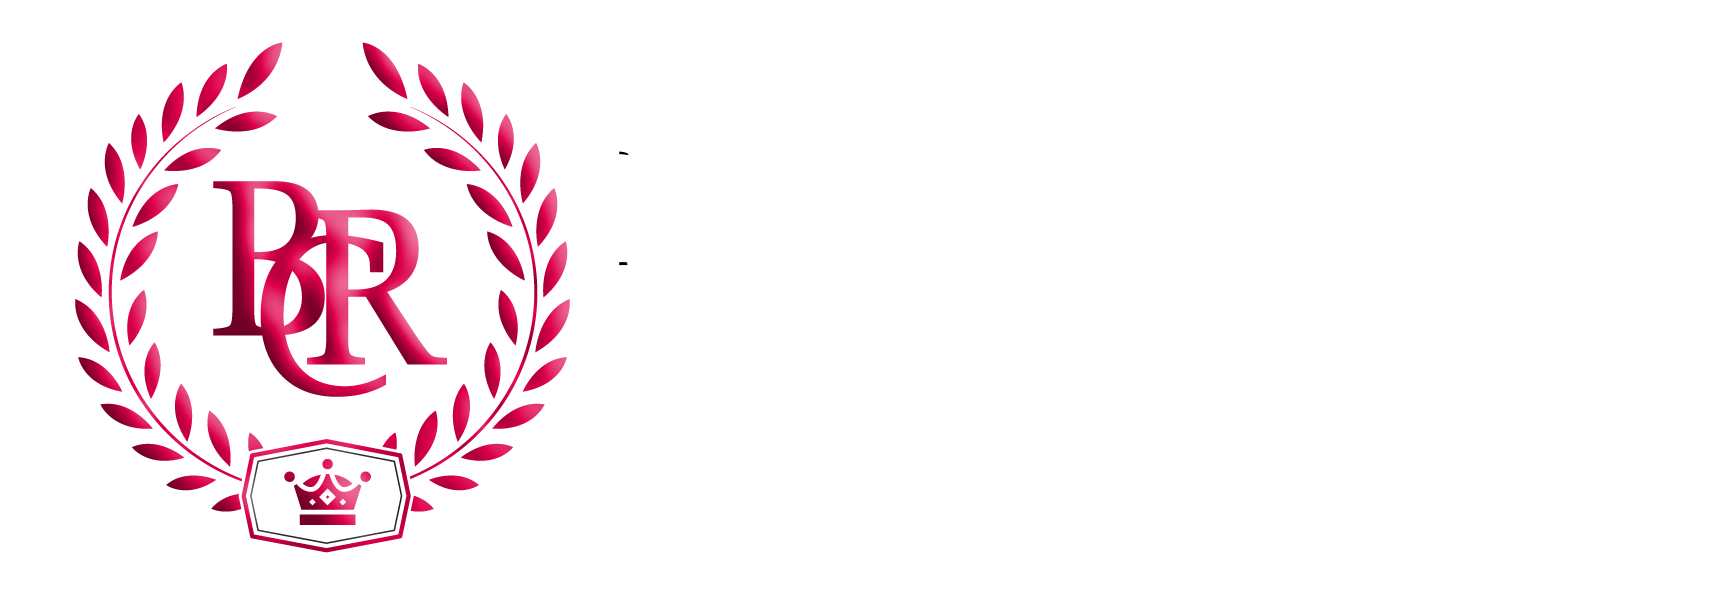 Best Research Consultancy